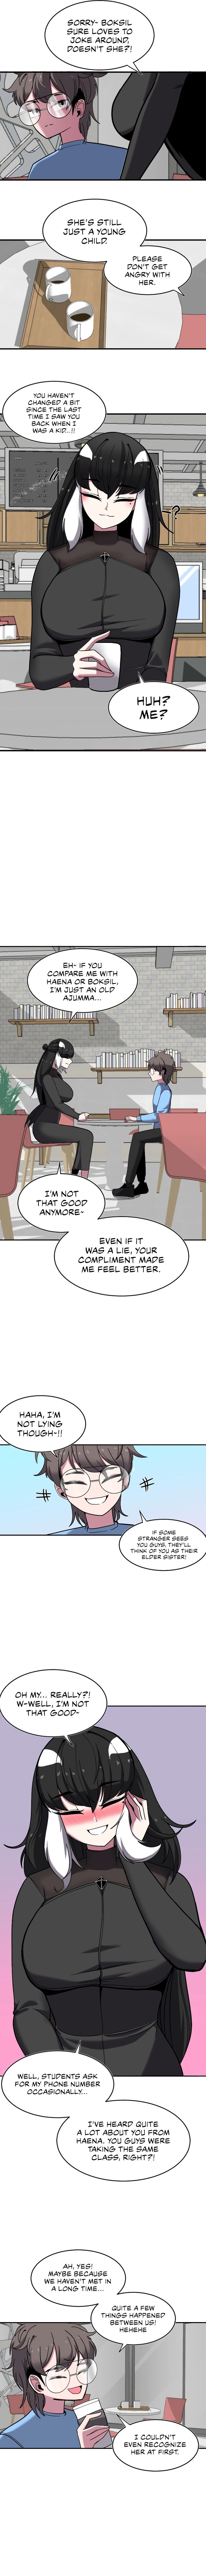 Double Life of Gukbap - Chapter 10 Page 6